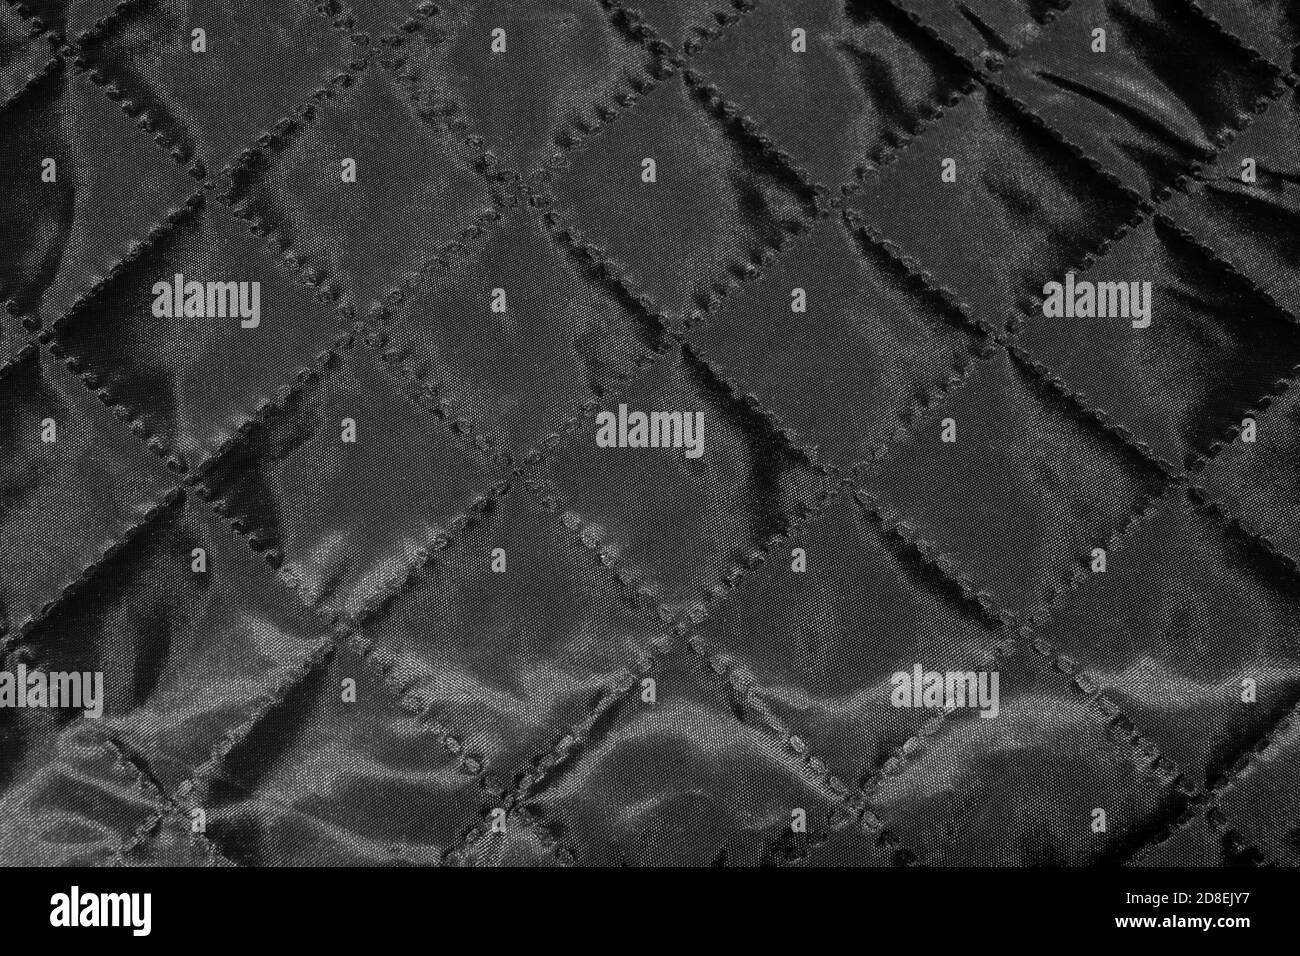 shiny silver grey fabric with rhombs texture close up surface Stock Photo